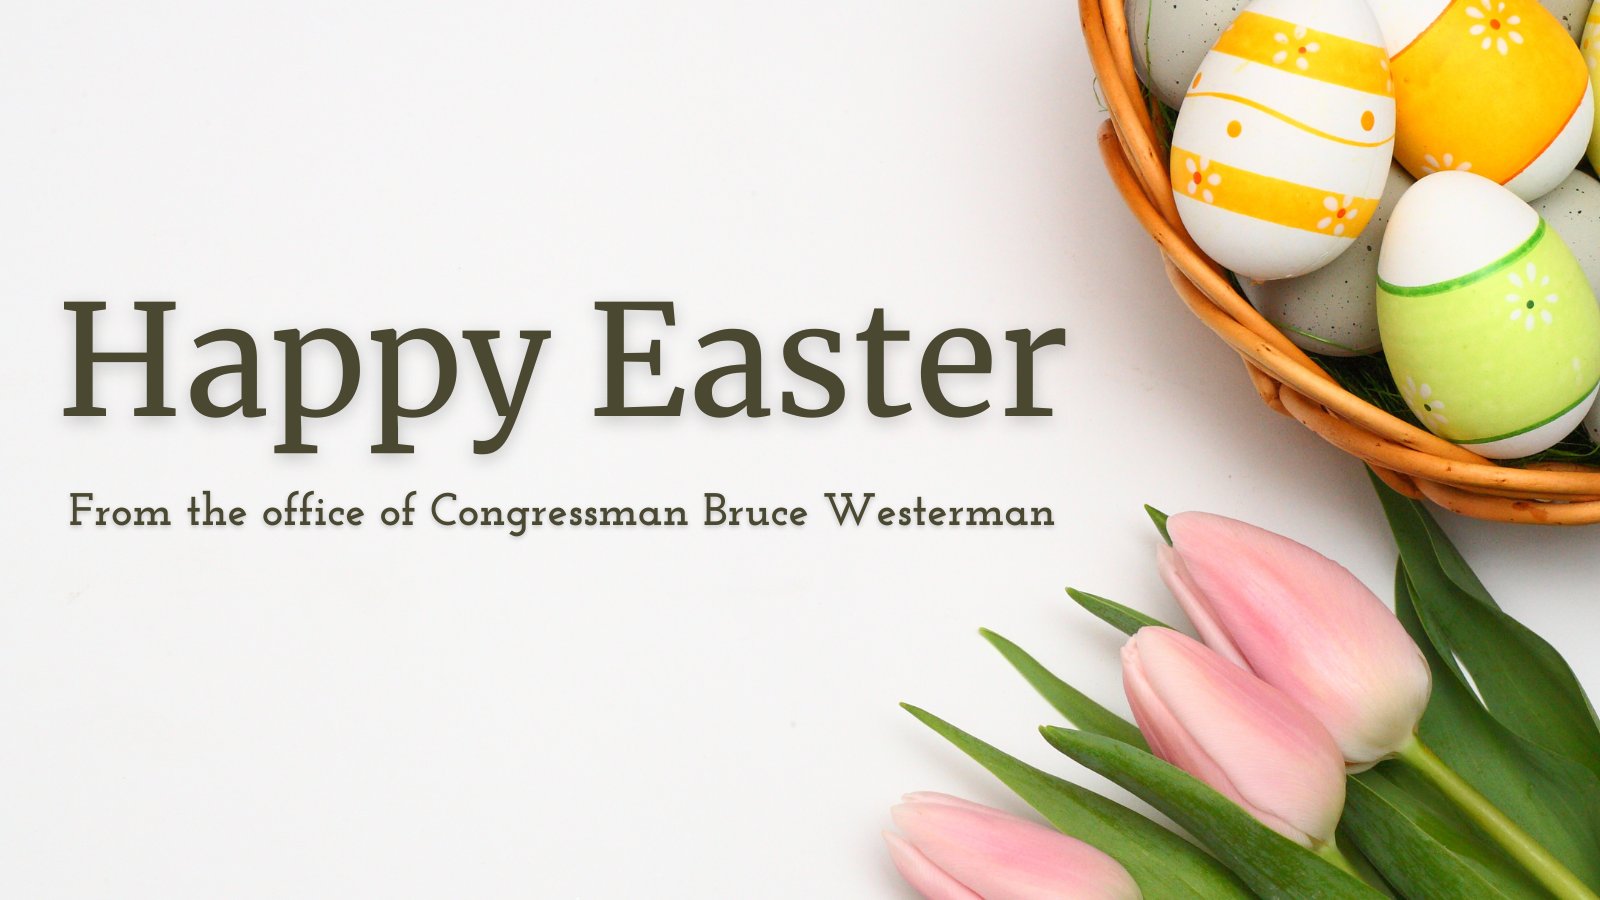 Rep. Bruce Westerman on Twitter: 